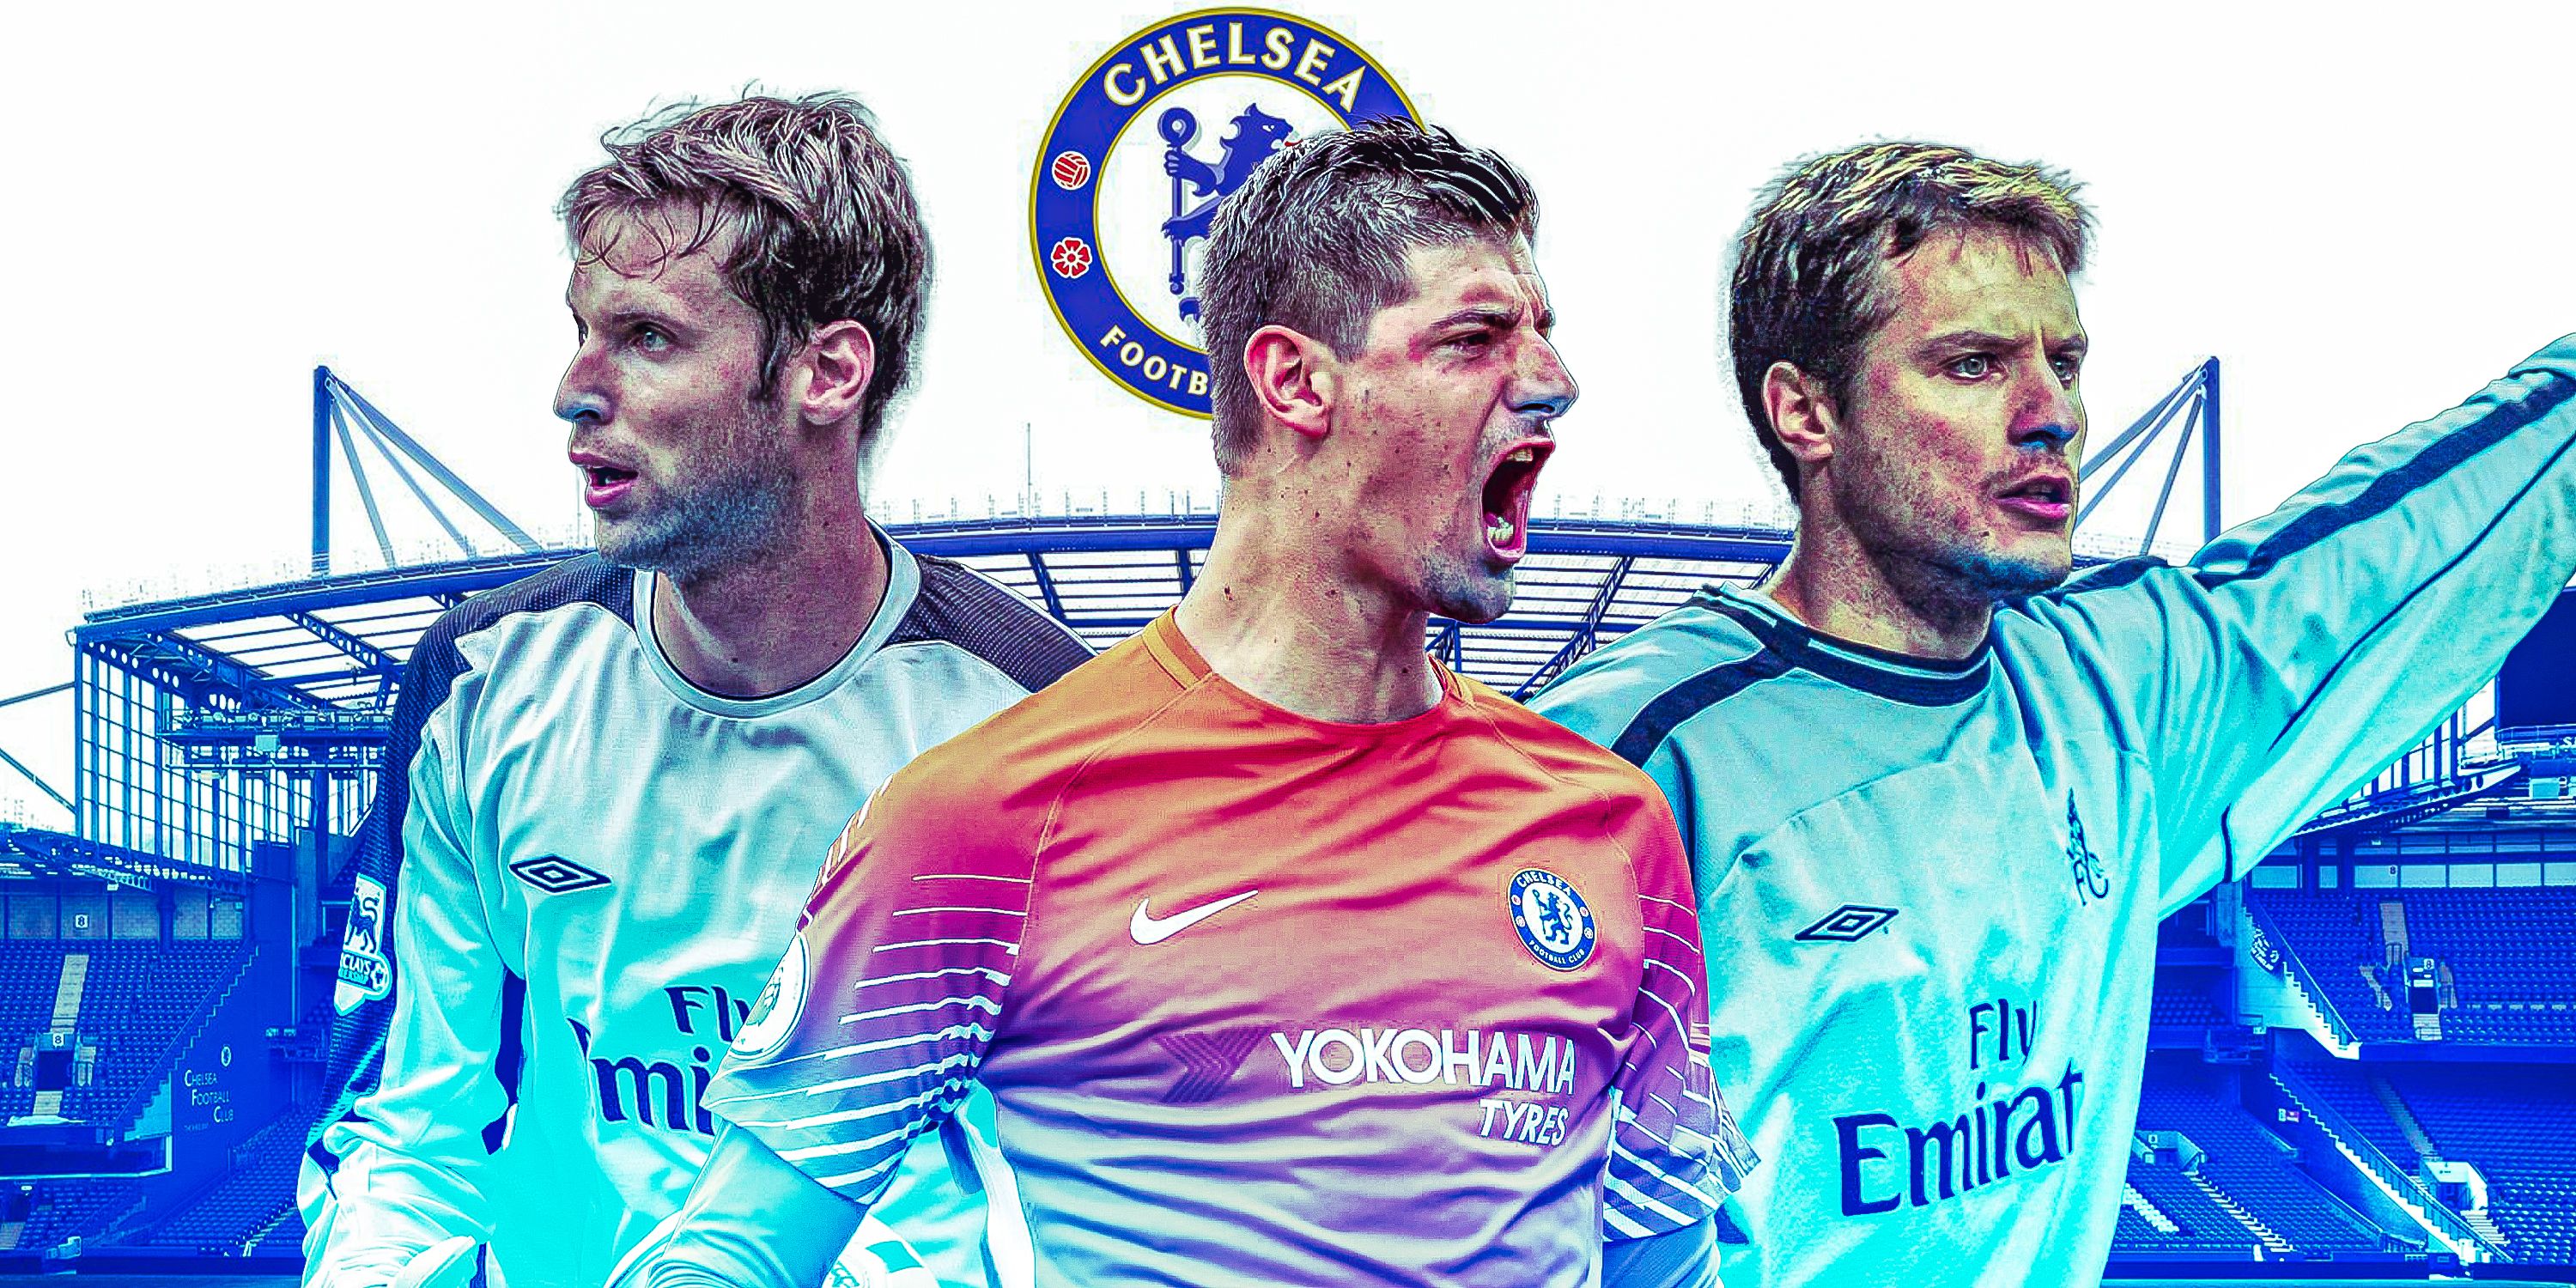 Ranking best Chelsea goalkeepers ft Petr Cech, Thibaut Courtois and Carlo Cudicini